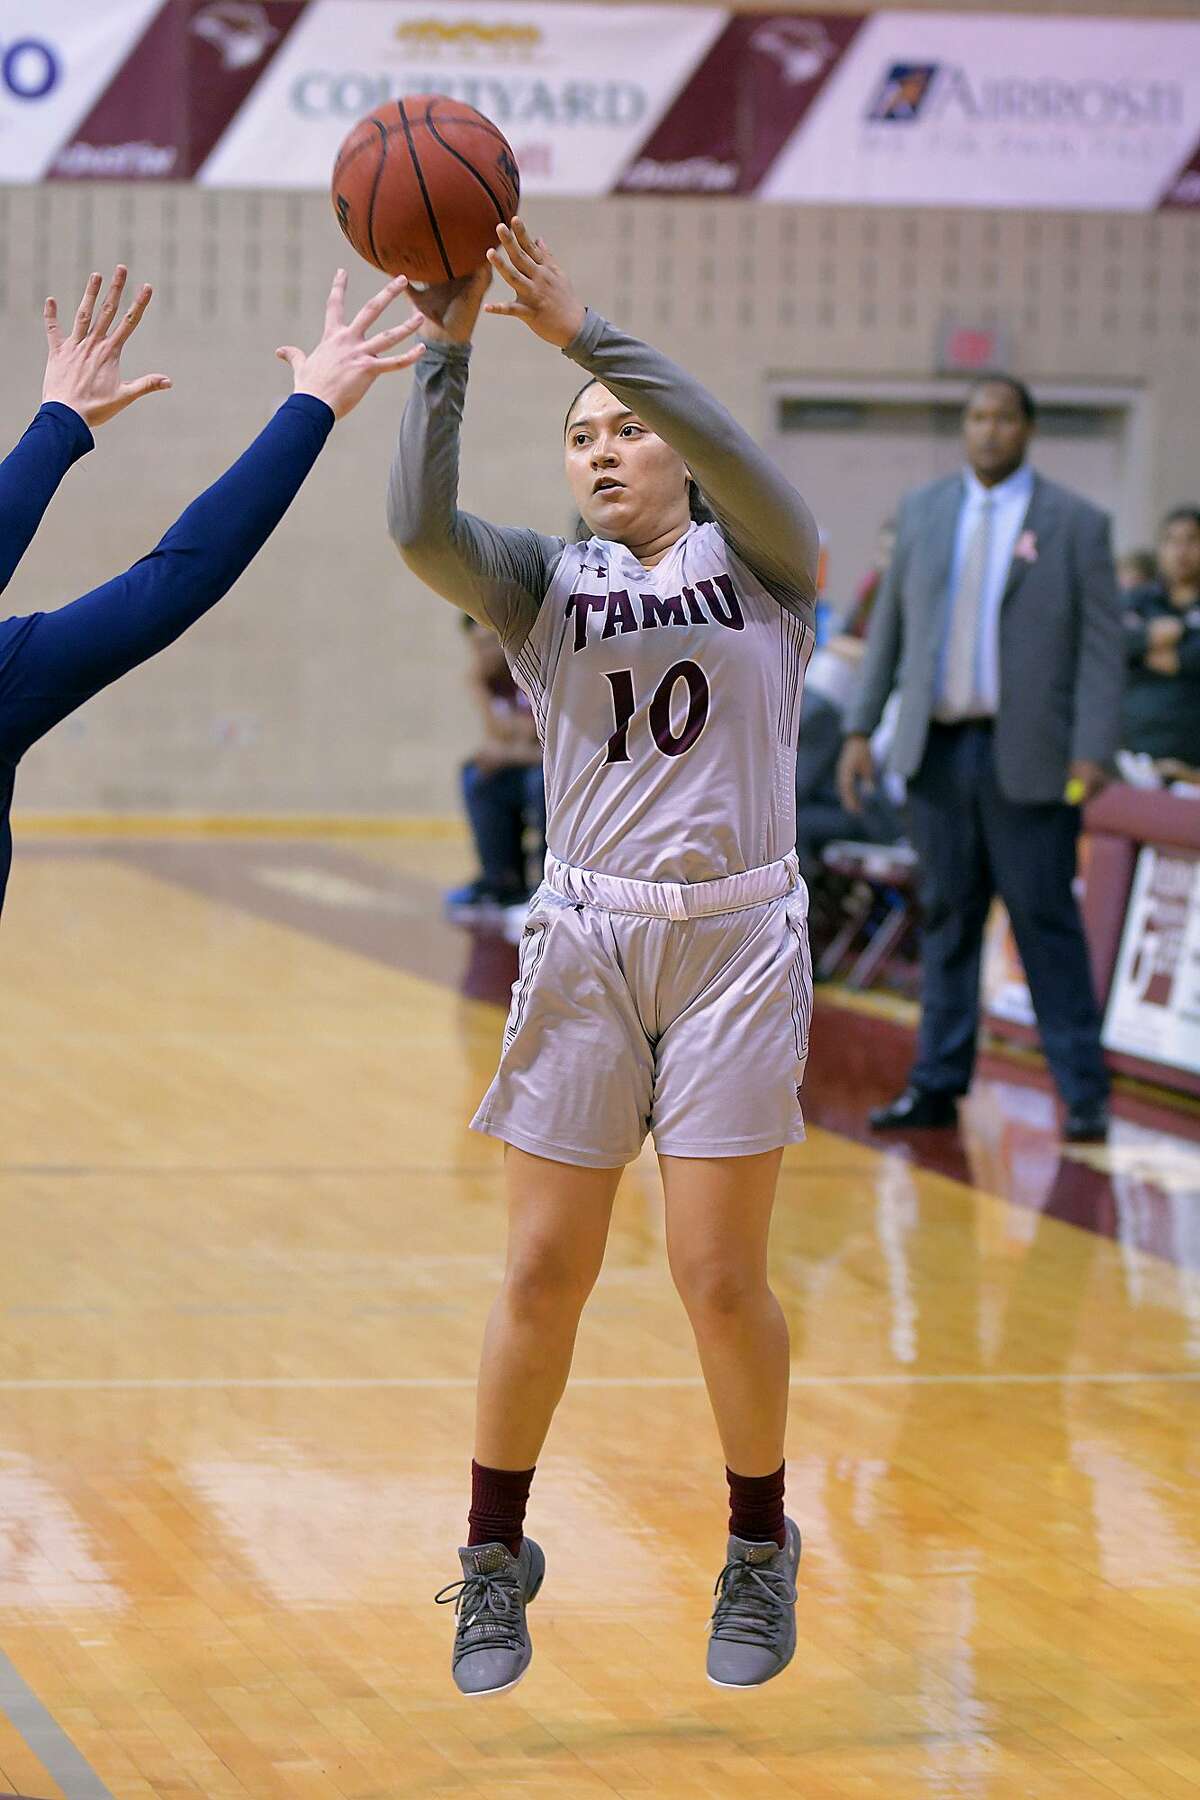 Marina Gatica and TAMIU lost 74-50 to third-place St. Edward’s Wednesday as they are now 0-25 with one game left in the regular season.